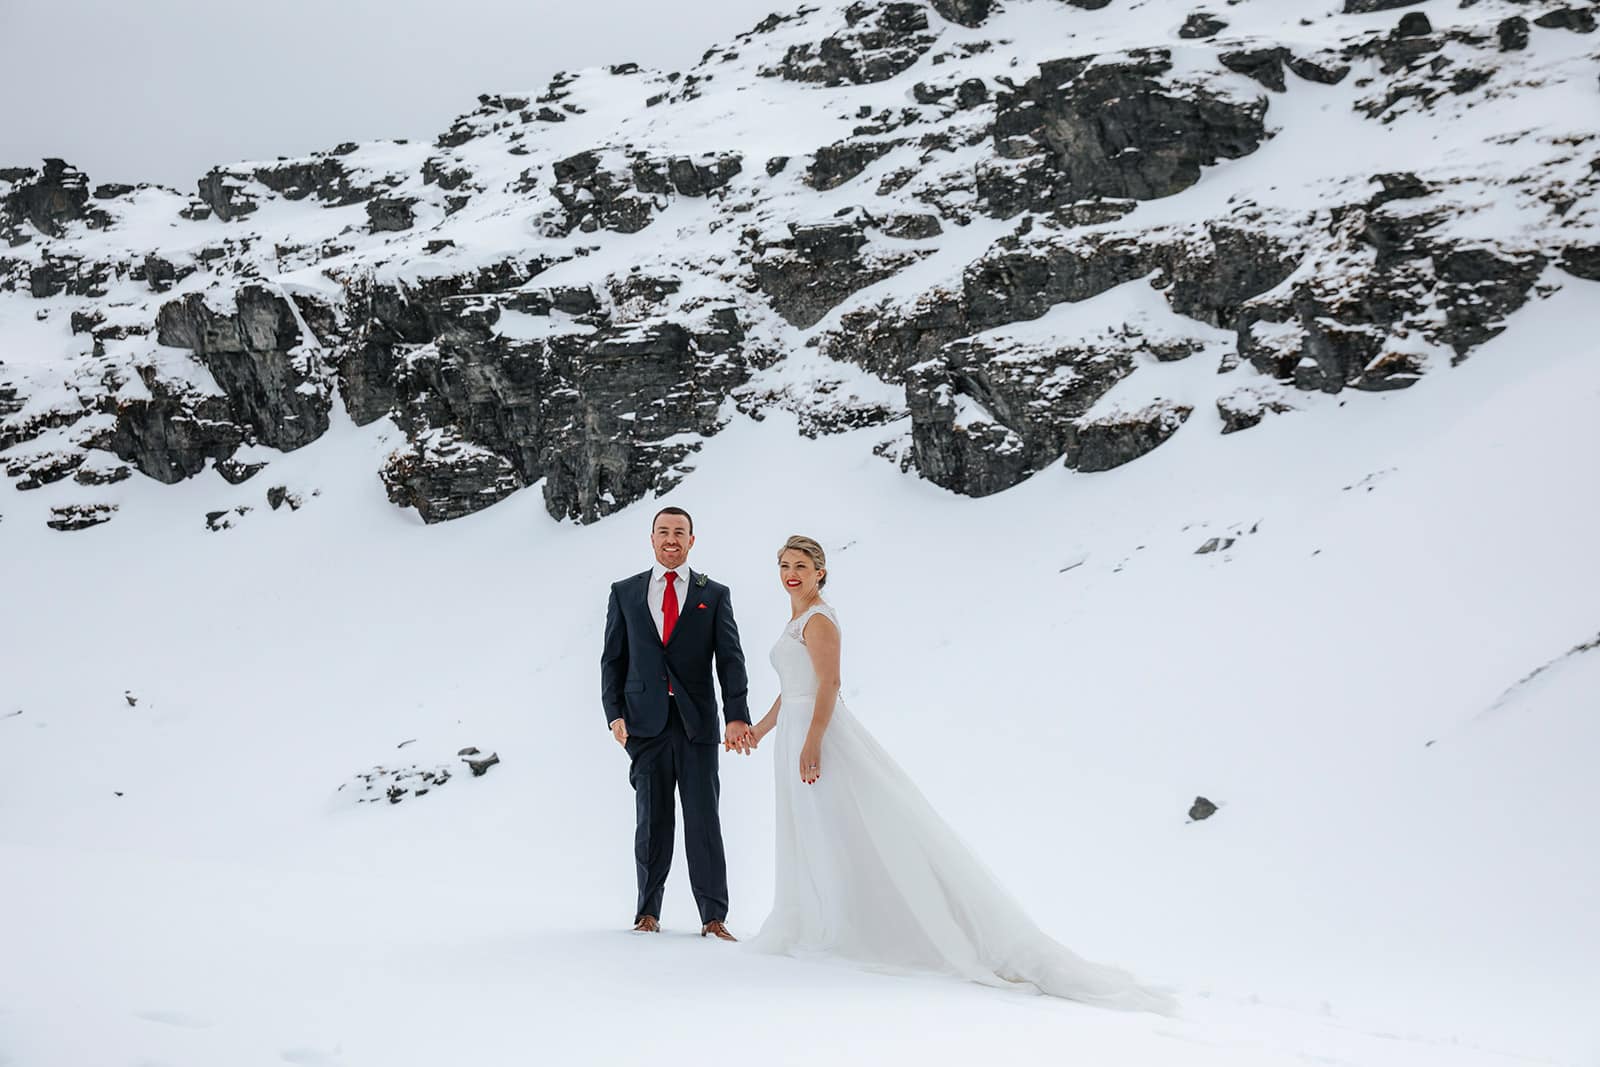 Queenstown Helicopter elopement in the snow on Cecil Peak